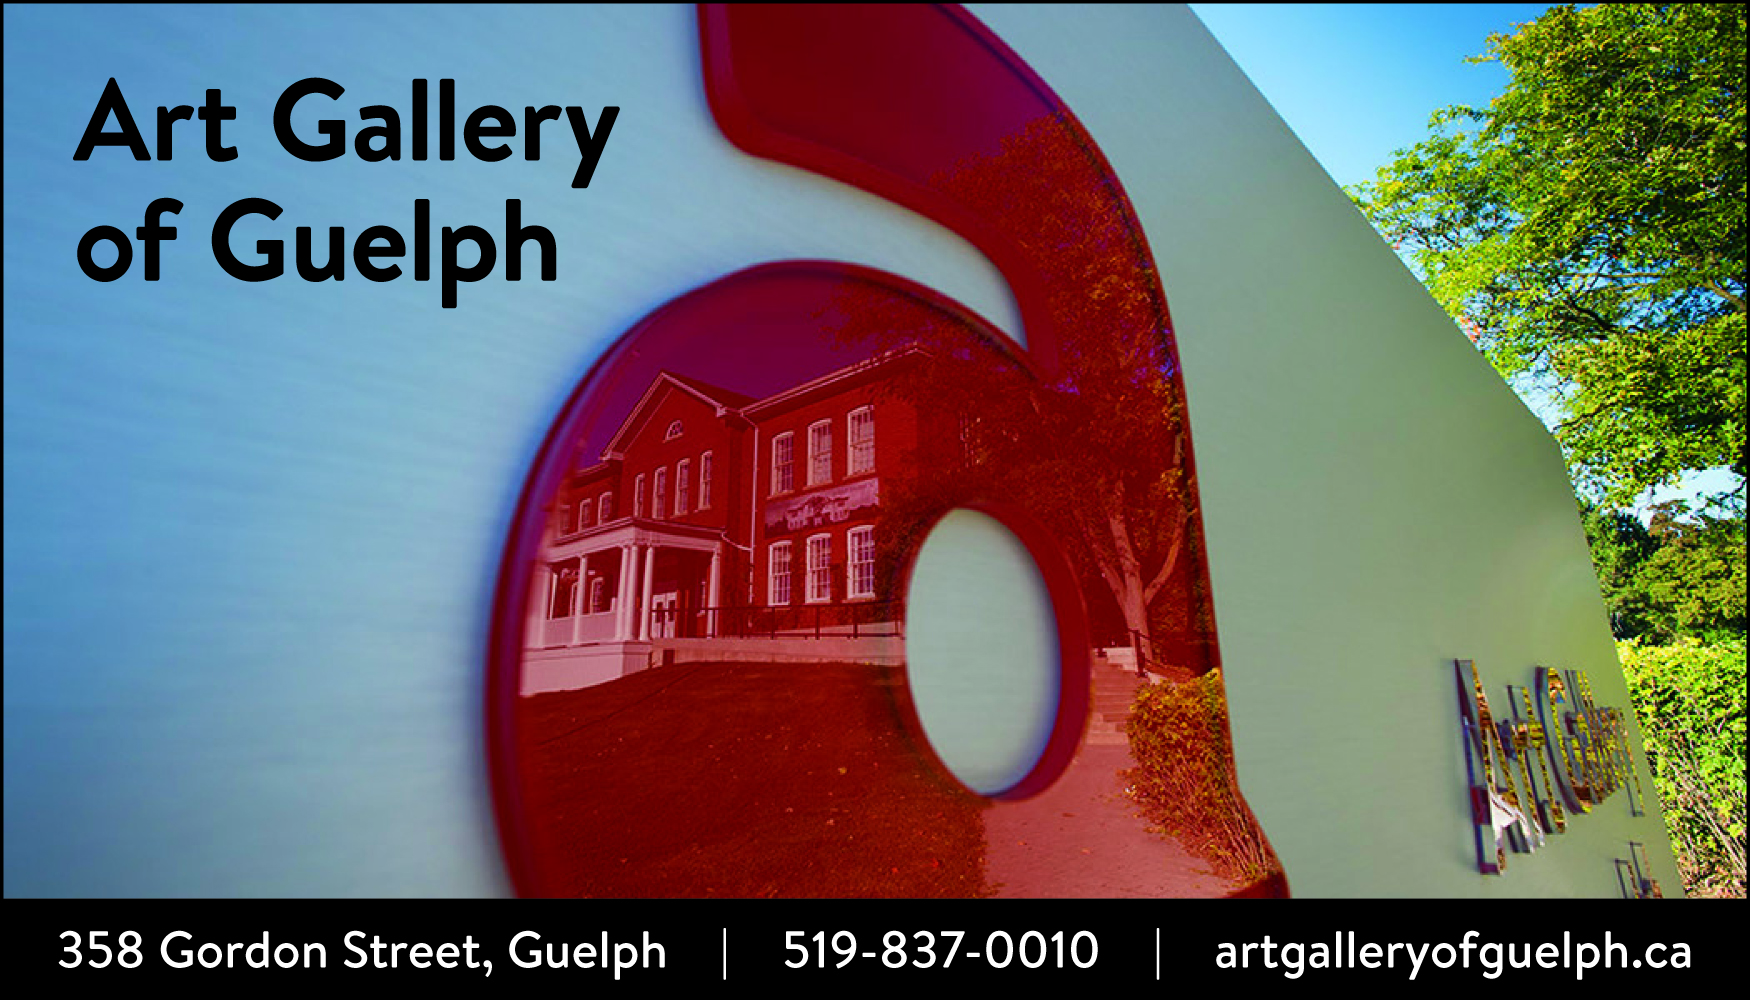 art gallery of guelph advertising image